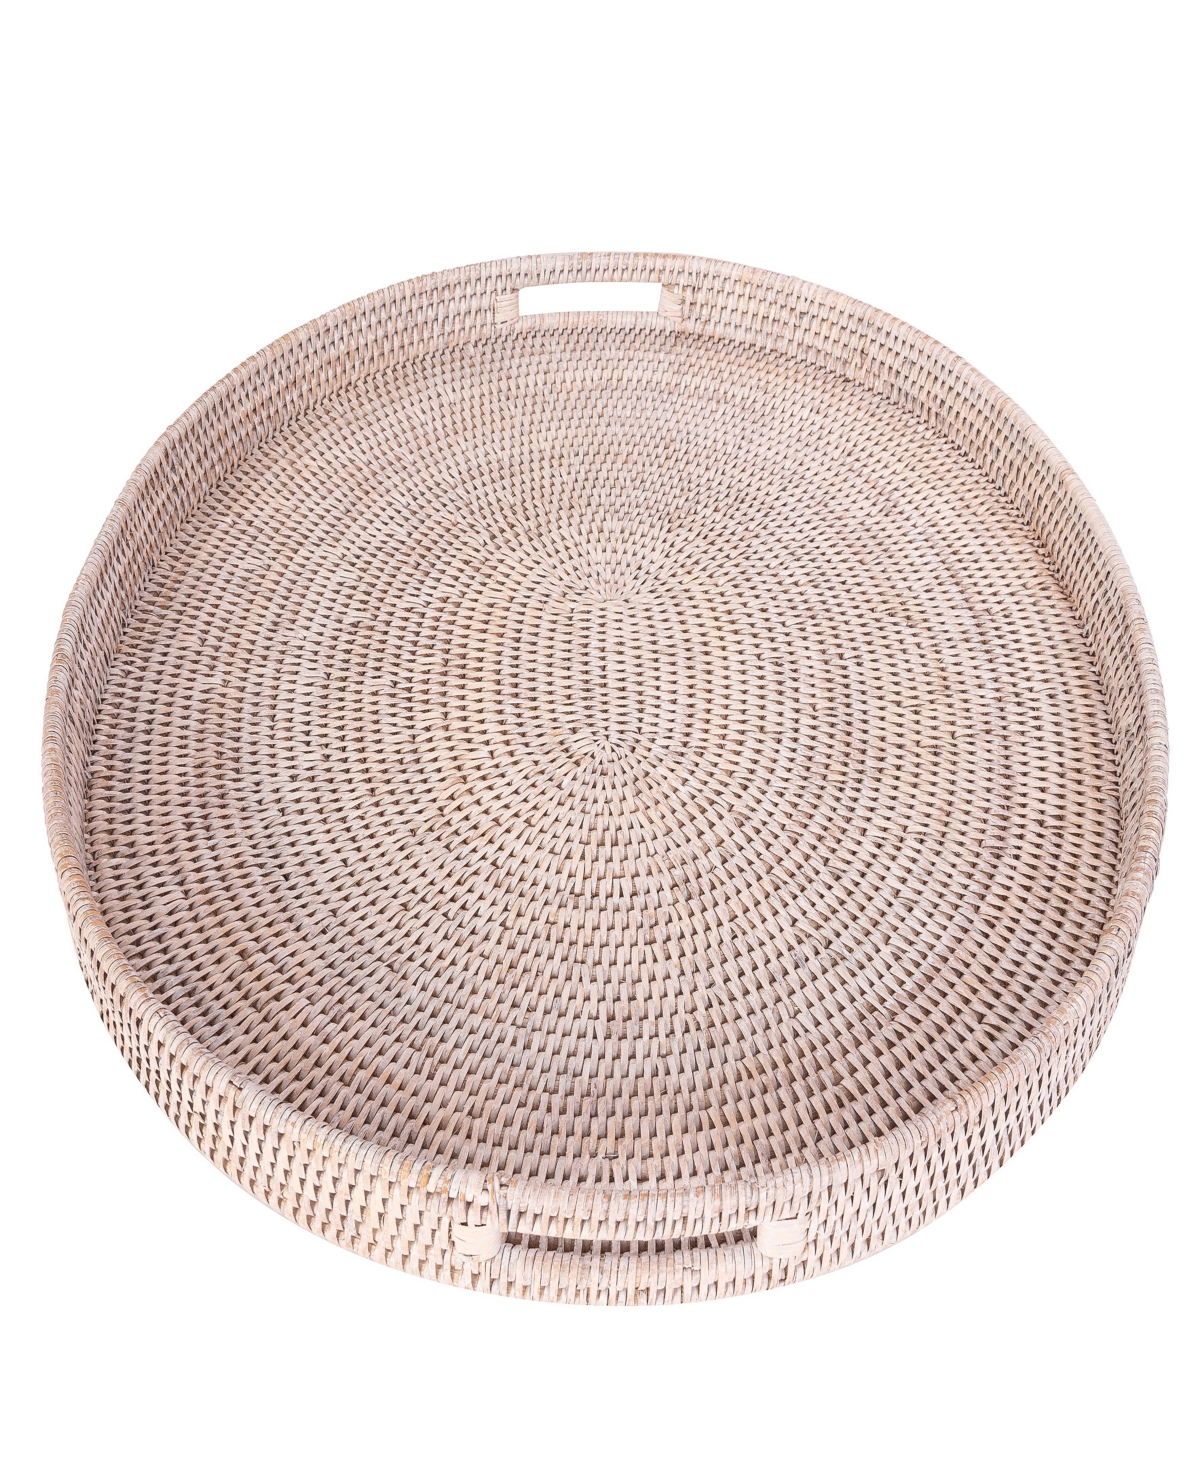 Artifacts Trading Company Artifacts Rattan Oval Ottoman Tray With Cutout Handles In White Wash